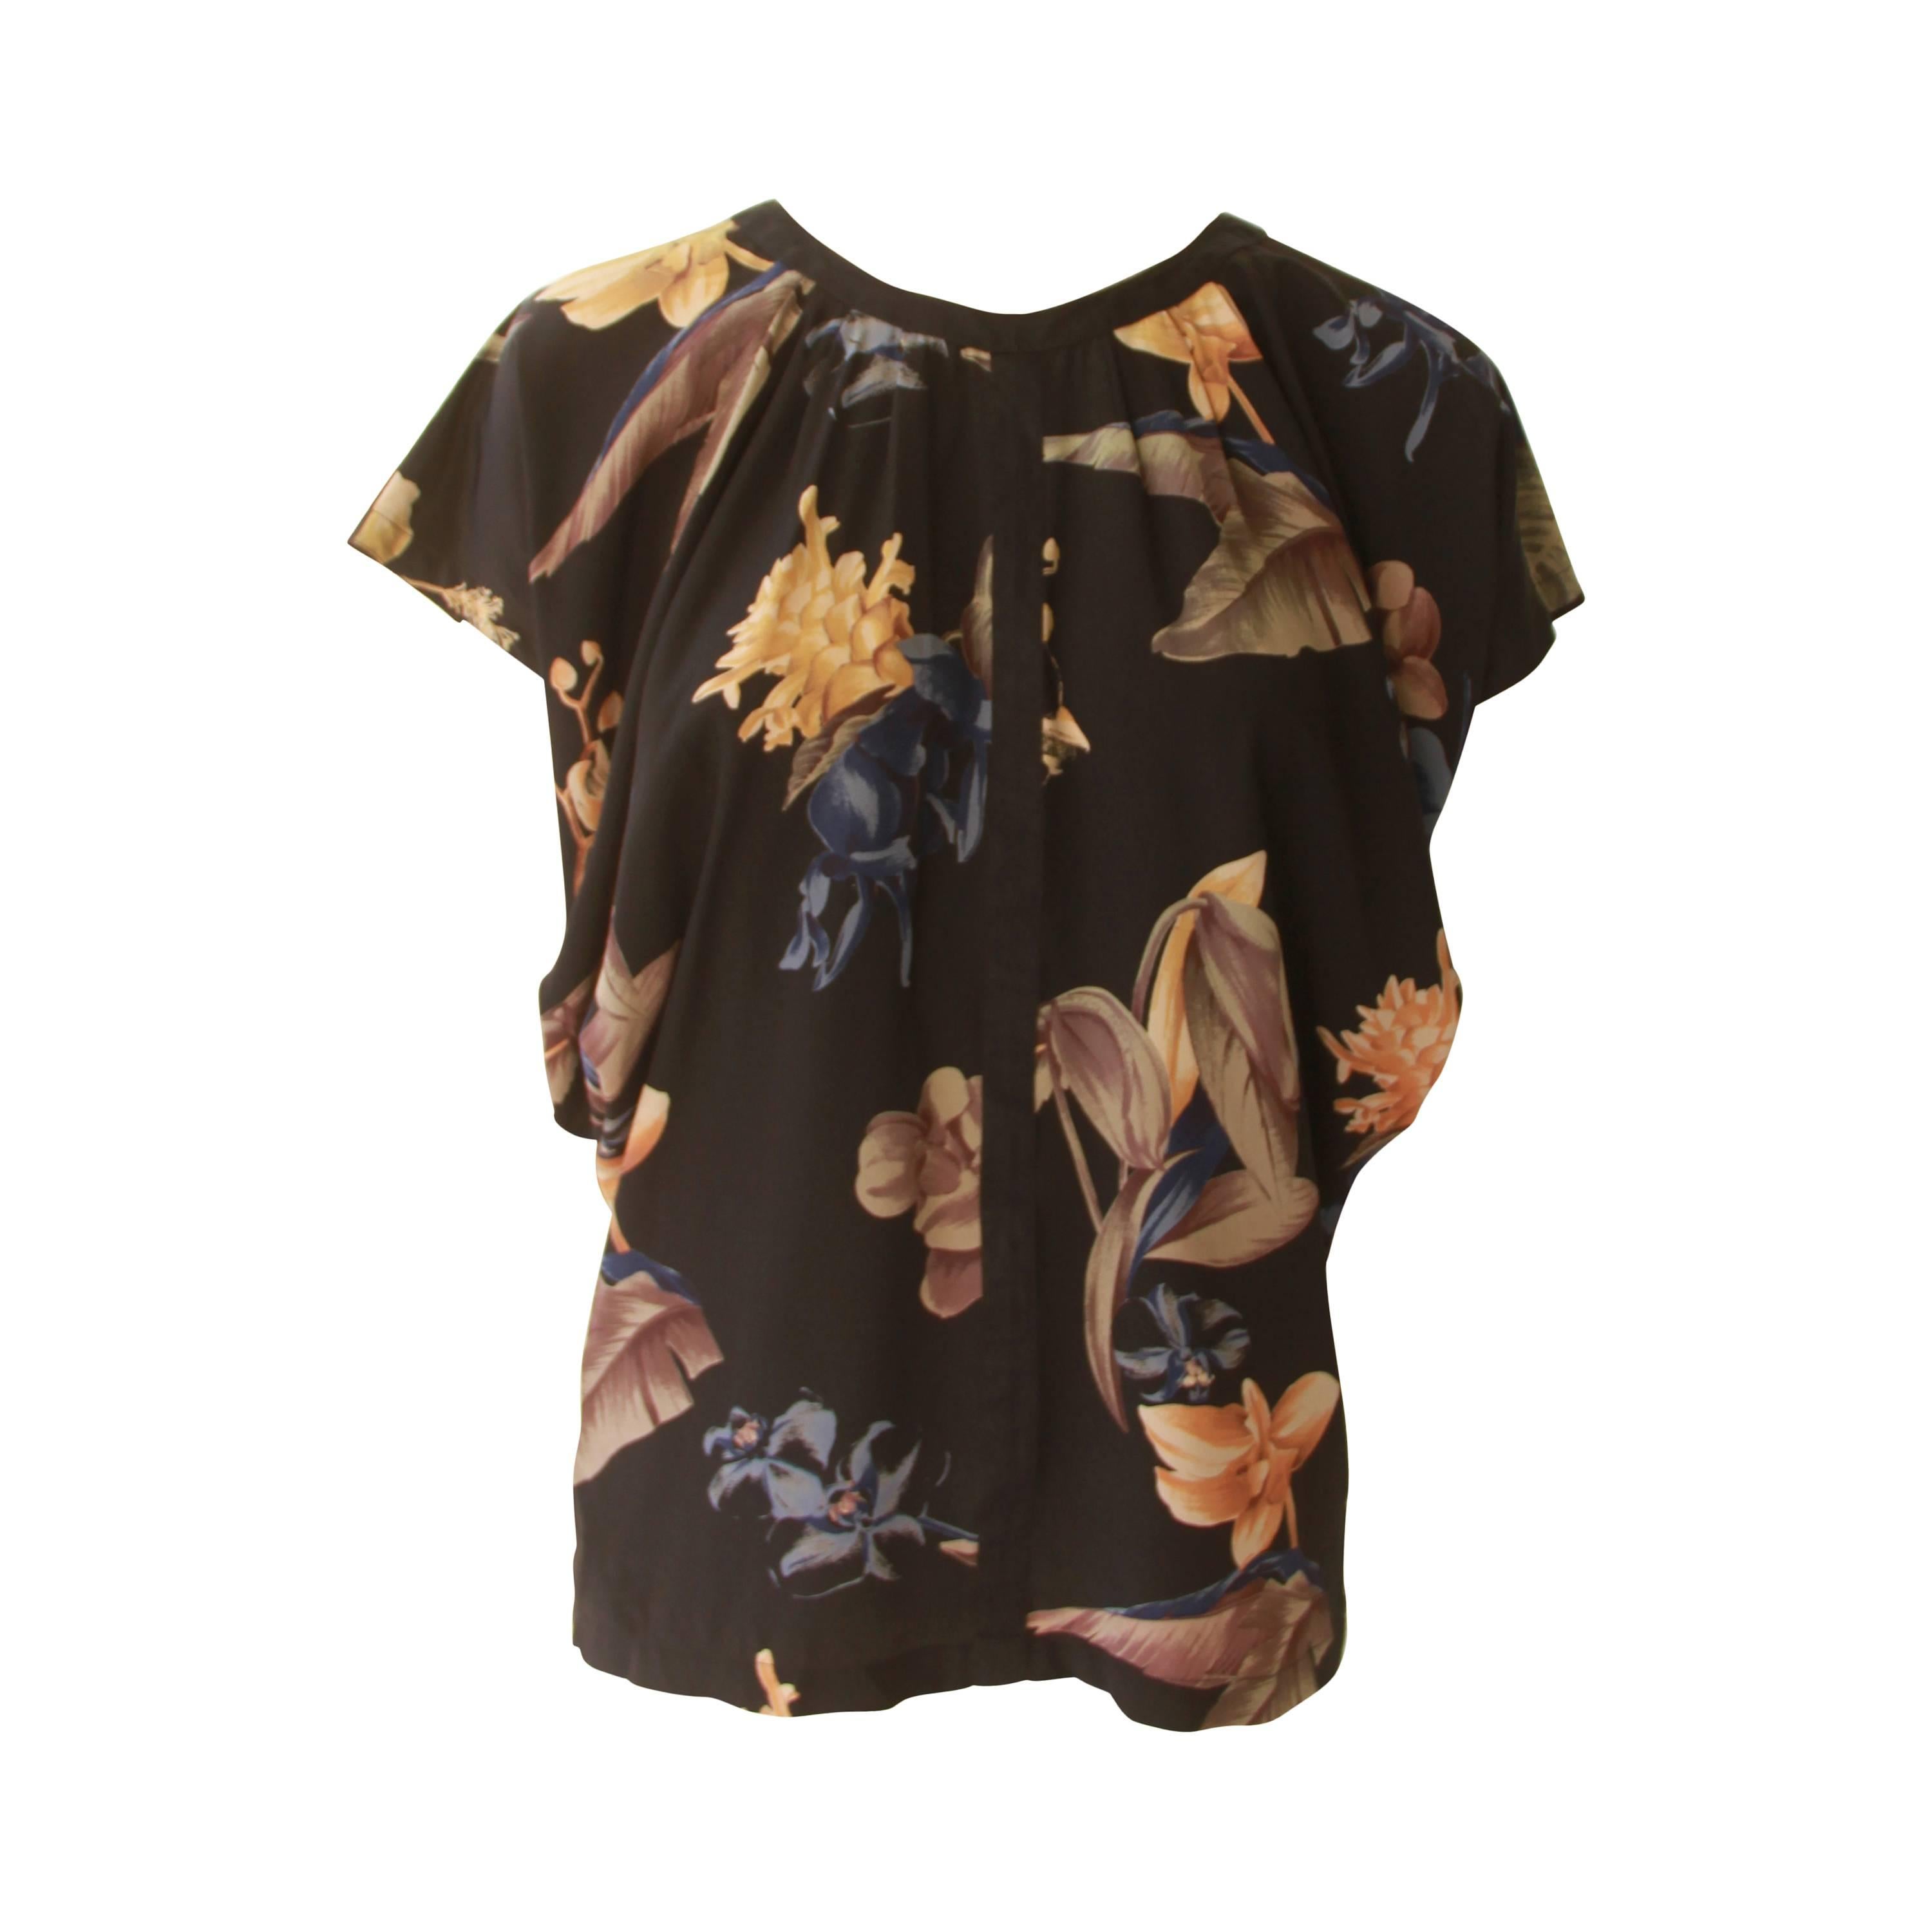 Early Gianni Versace Floral Printed Silk Blouse 1982 For Sale